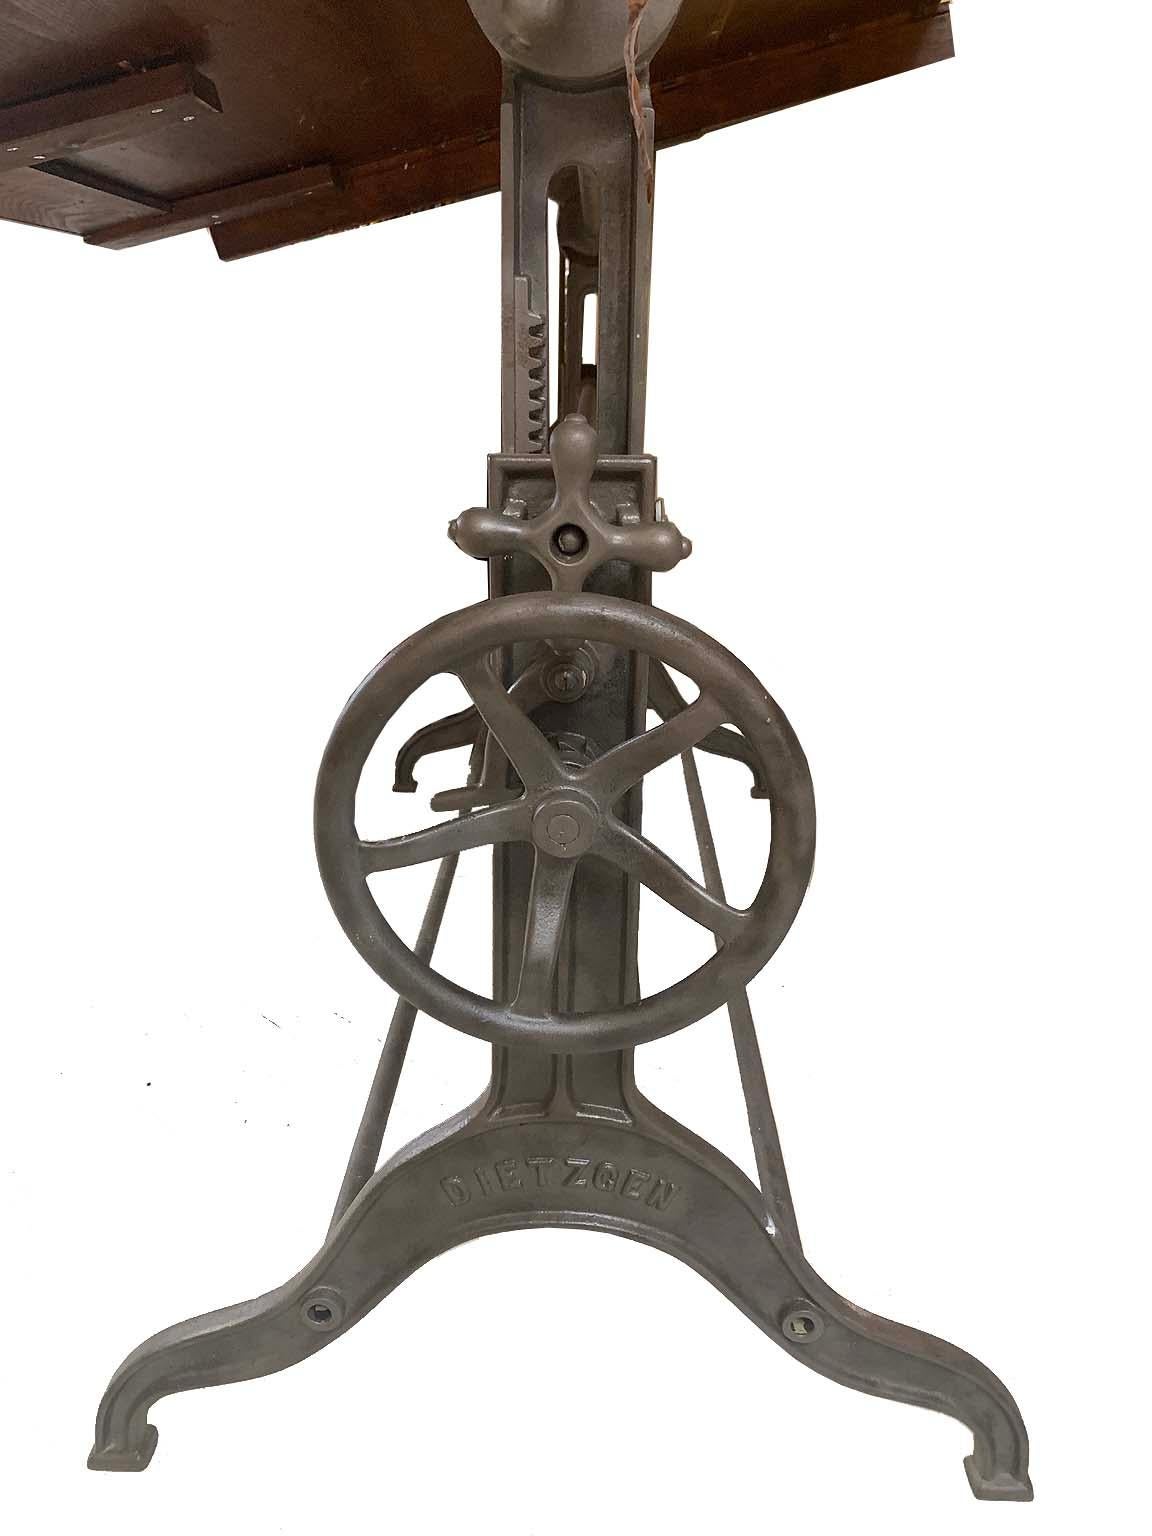 Dietzgen drafting table, makes a great stand up desk. Solid iron and maple wood. constructed solid and clean look. Cogs nicked on gear so adjustable up and down is a bit hard.